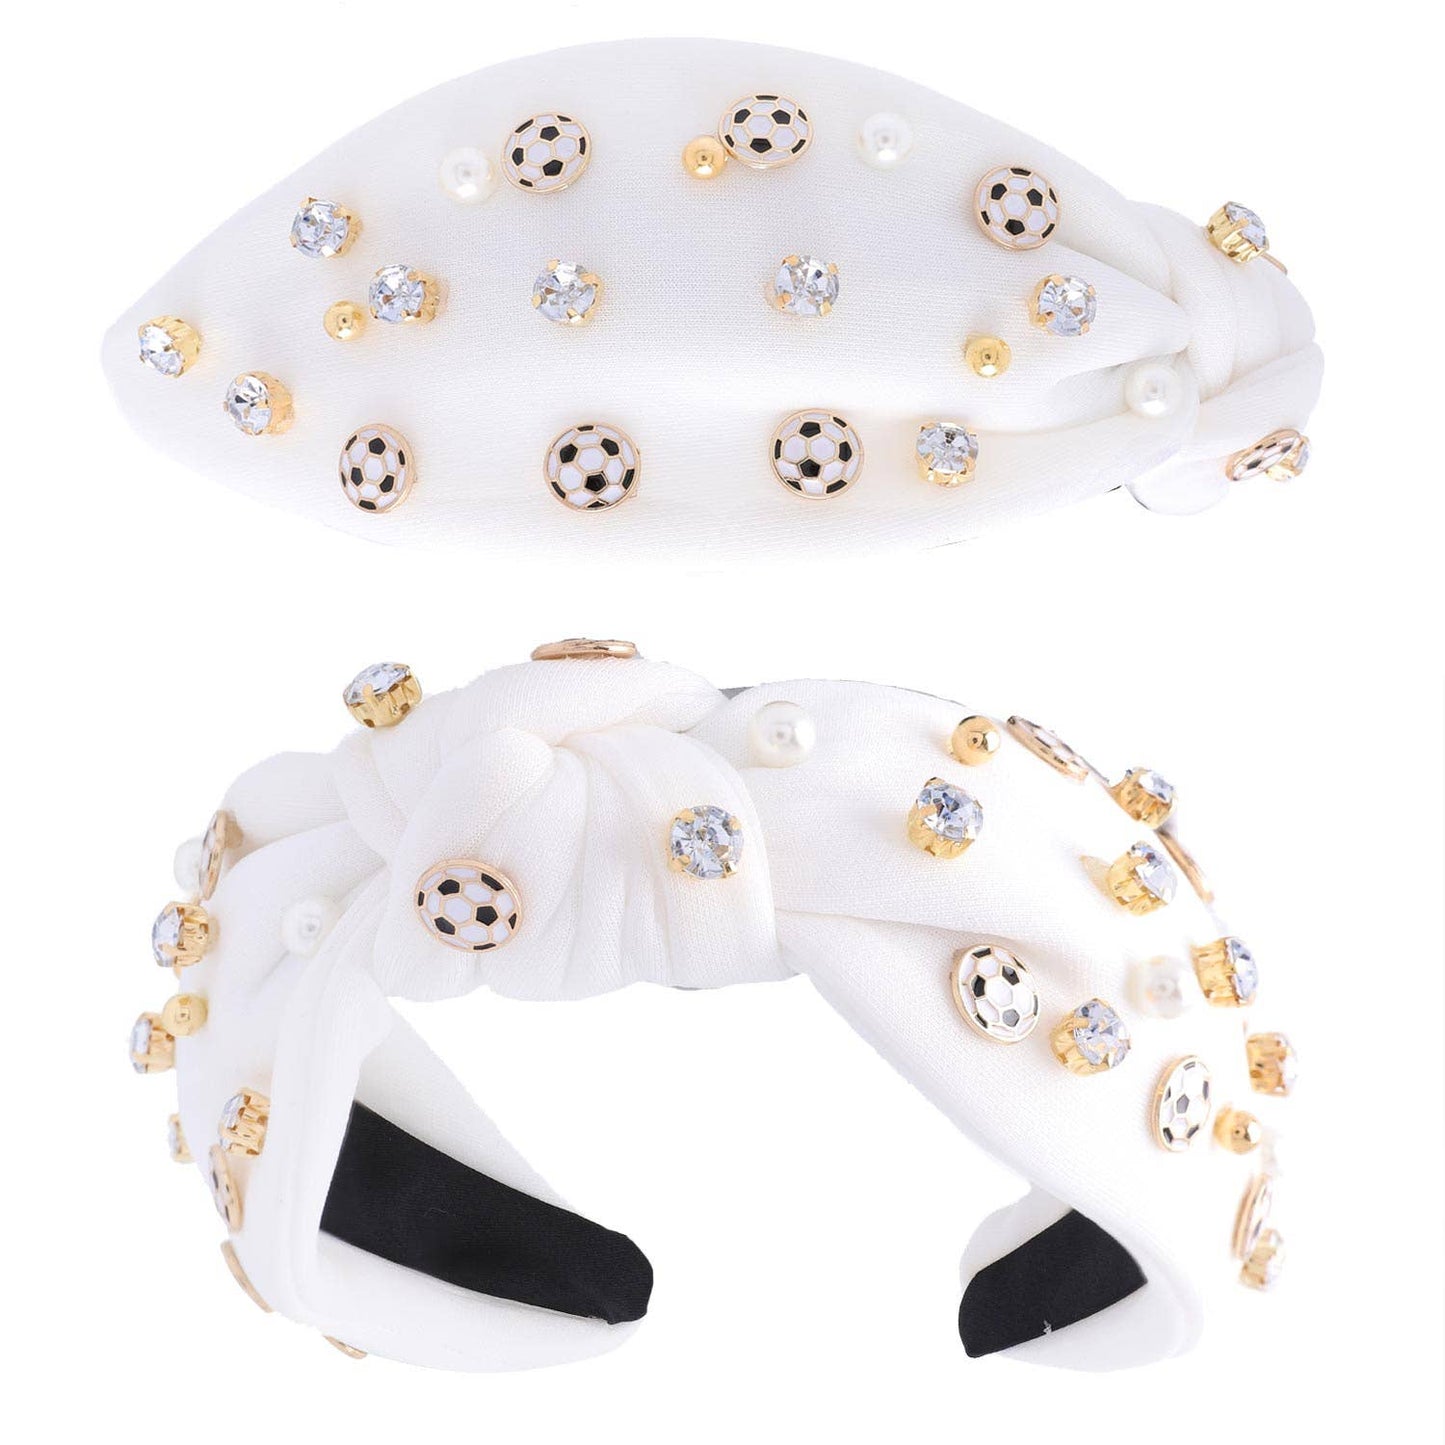 Jeweled & Pearl Beaded w/ Soccer Charms Knotted Headband